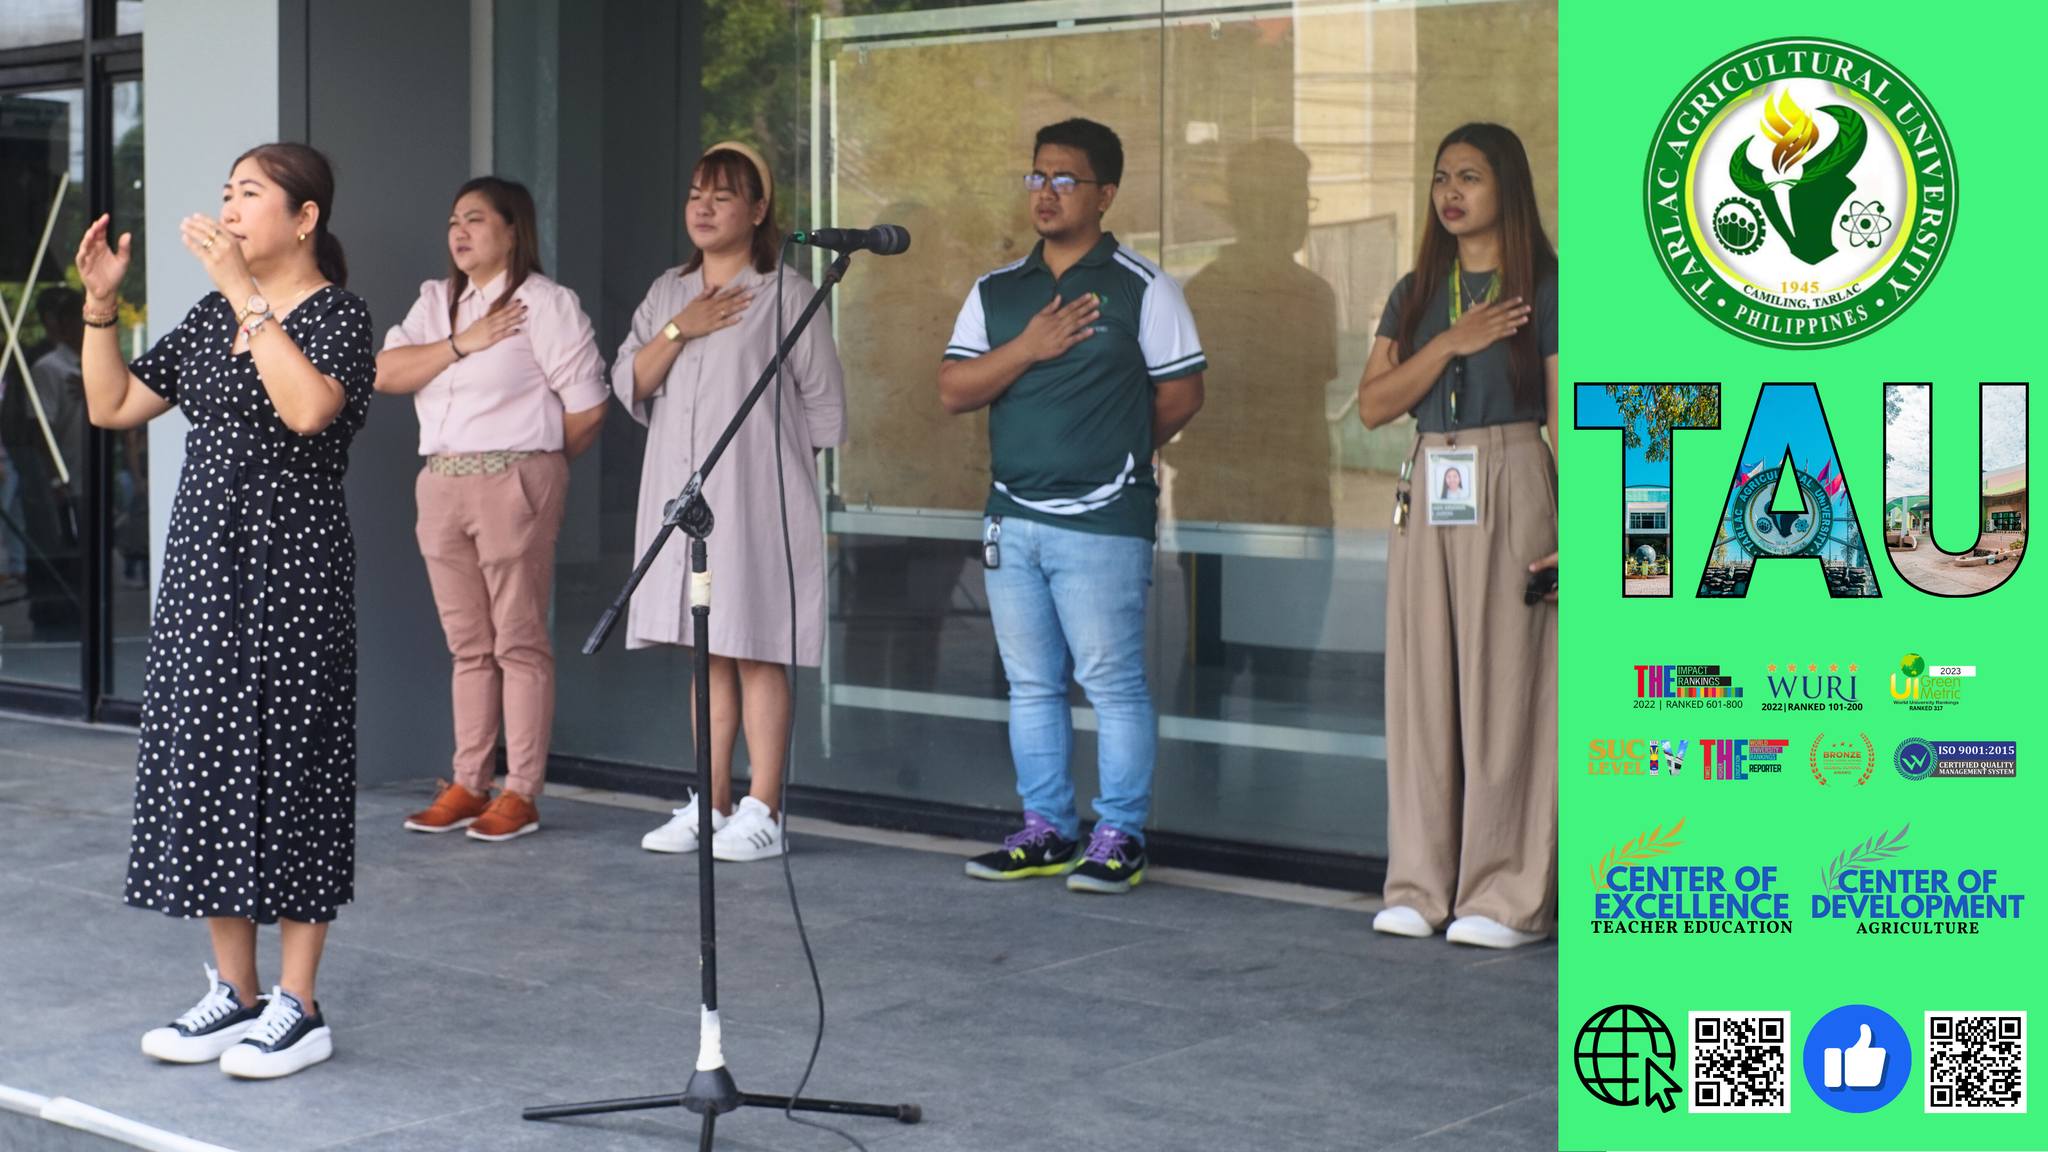 𝐂𝐀𝐏𝐓𝐔𝐑𝐄𝐃 𝐈𝐍 𝐋𝐄𝐍𝐒 | Tarlac Agricultural University’s (TAU) Sociocultural Development Office (SDO) leads the University’s flag-raising ceremony today, 24 June